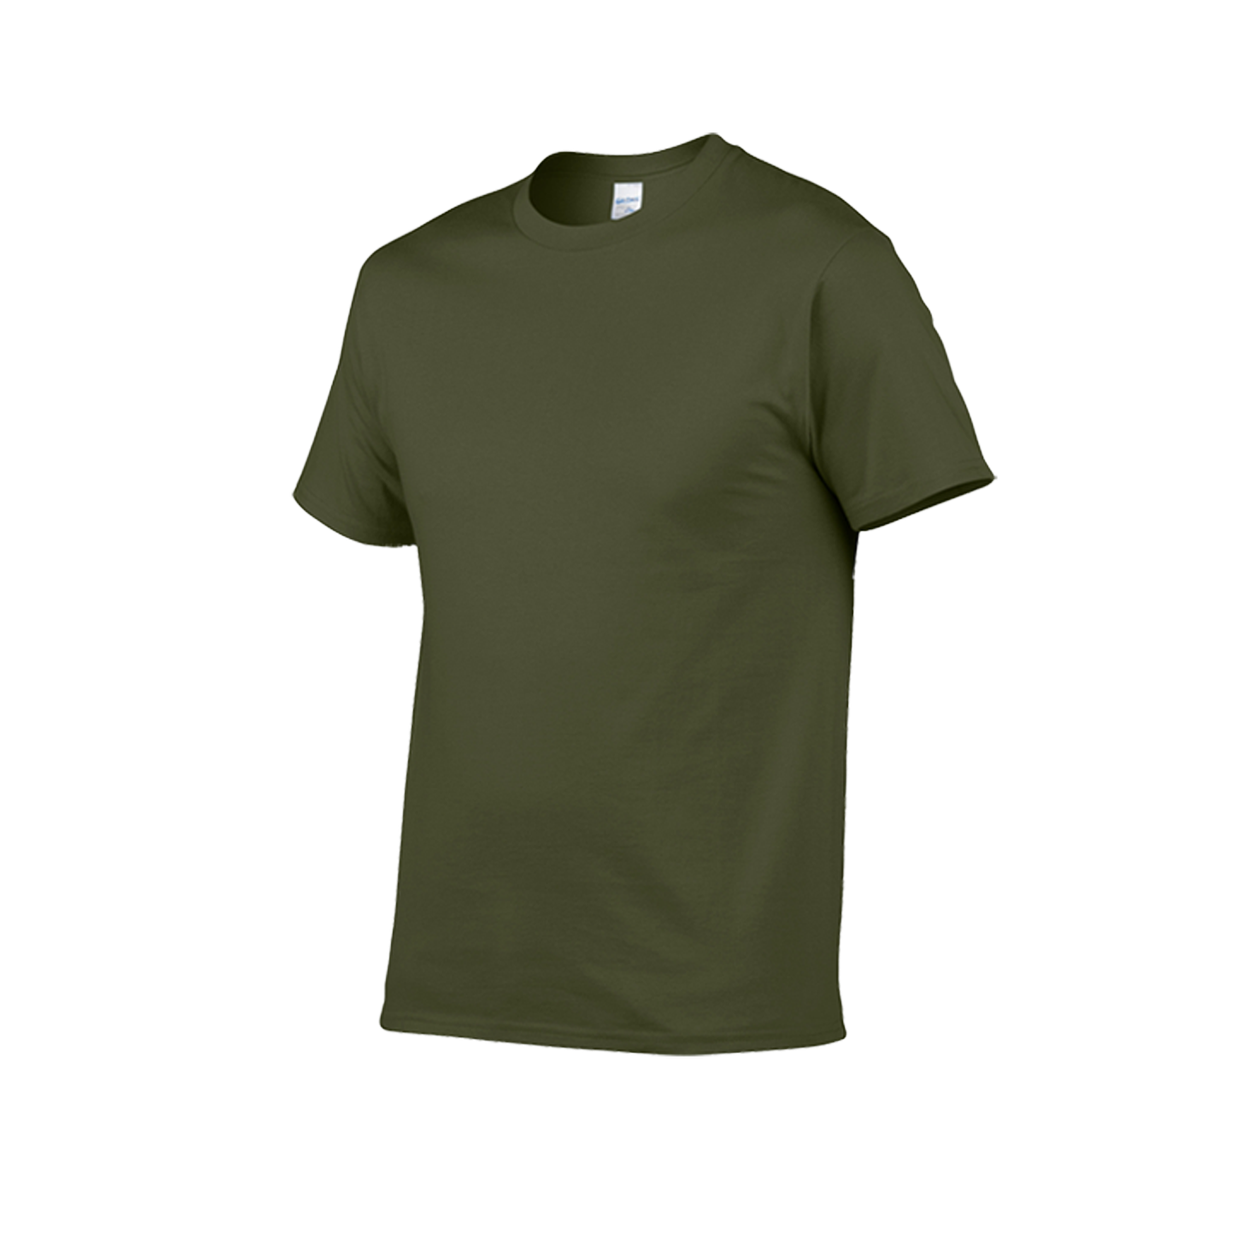 Round Neck T Shirt Png Photos (olive, black)